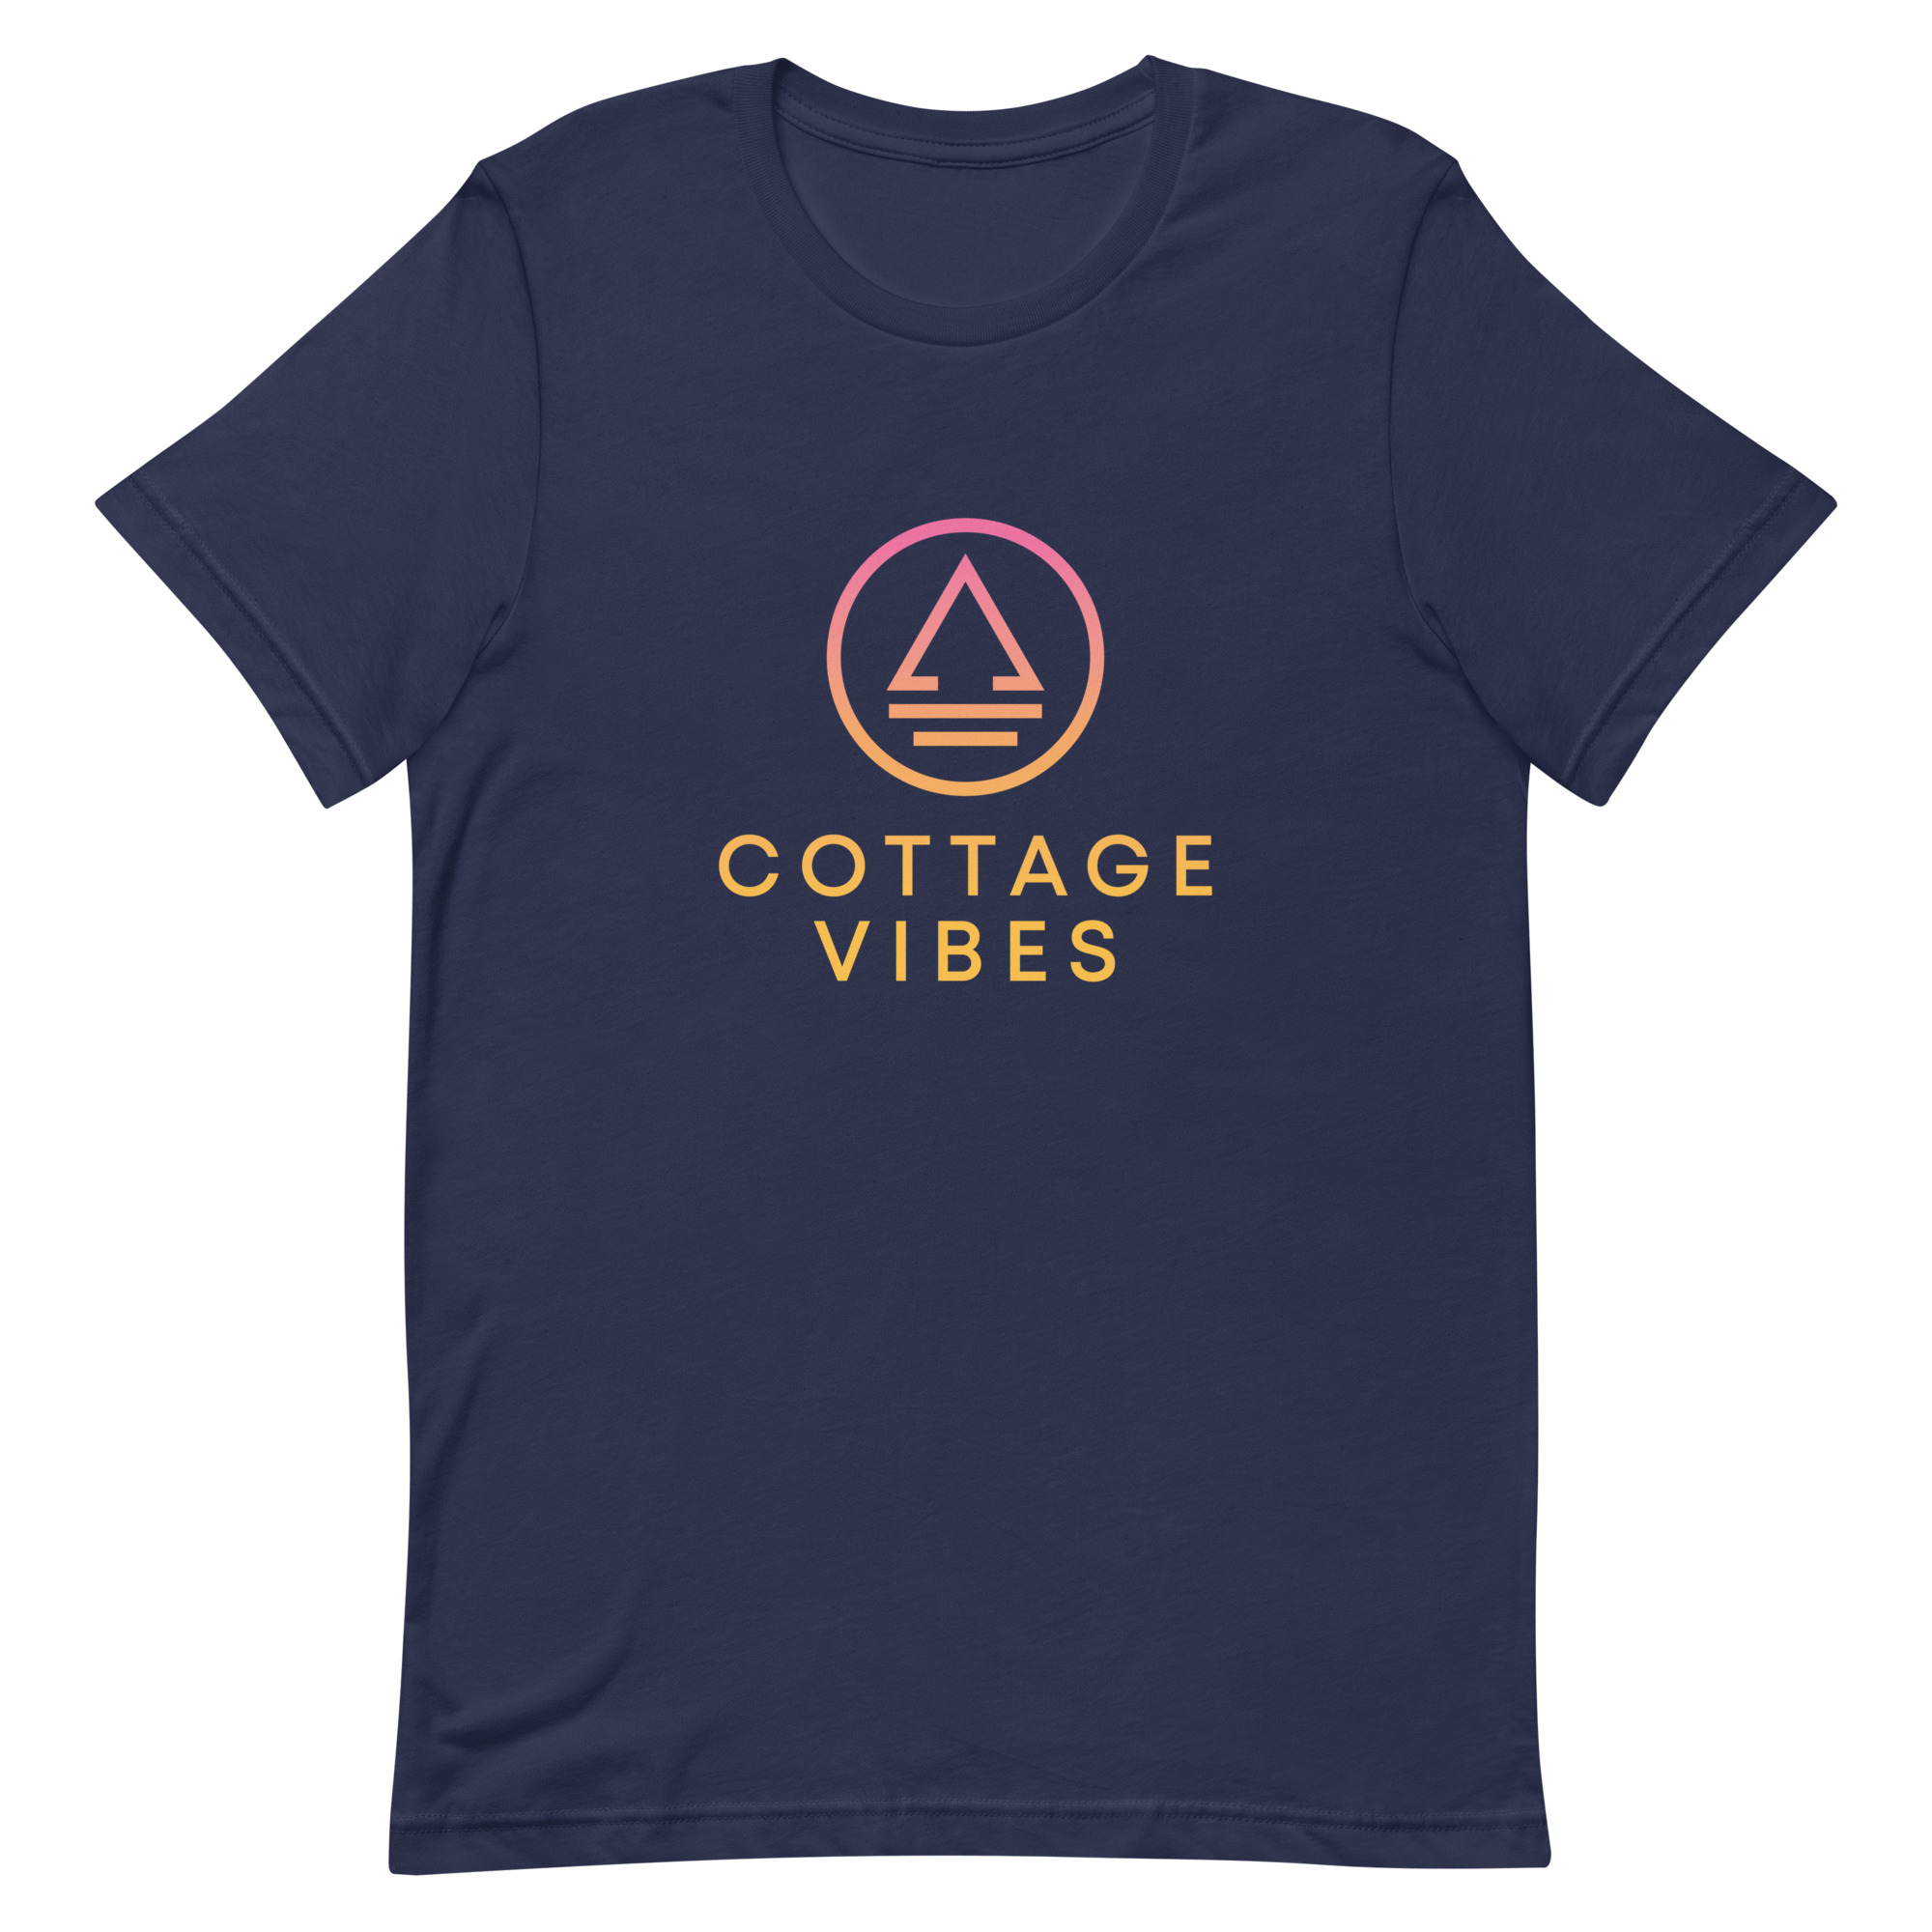 Welcome to Cottage Vibes